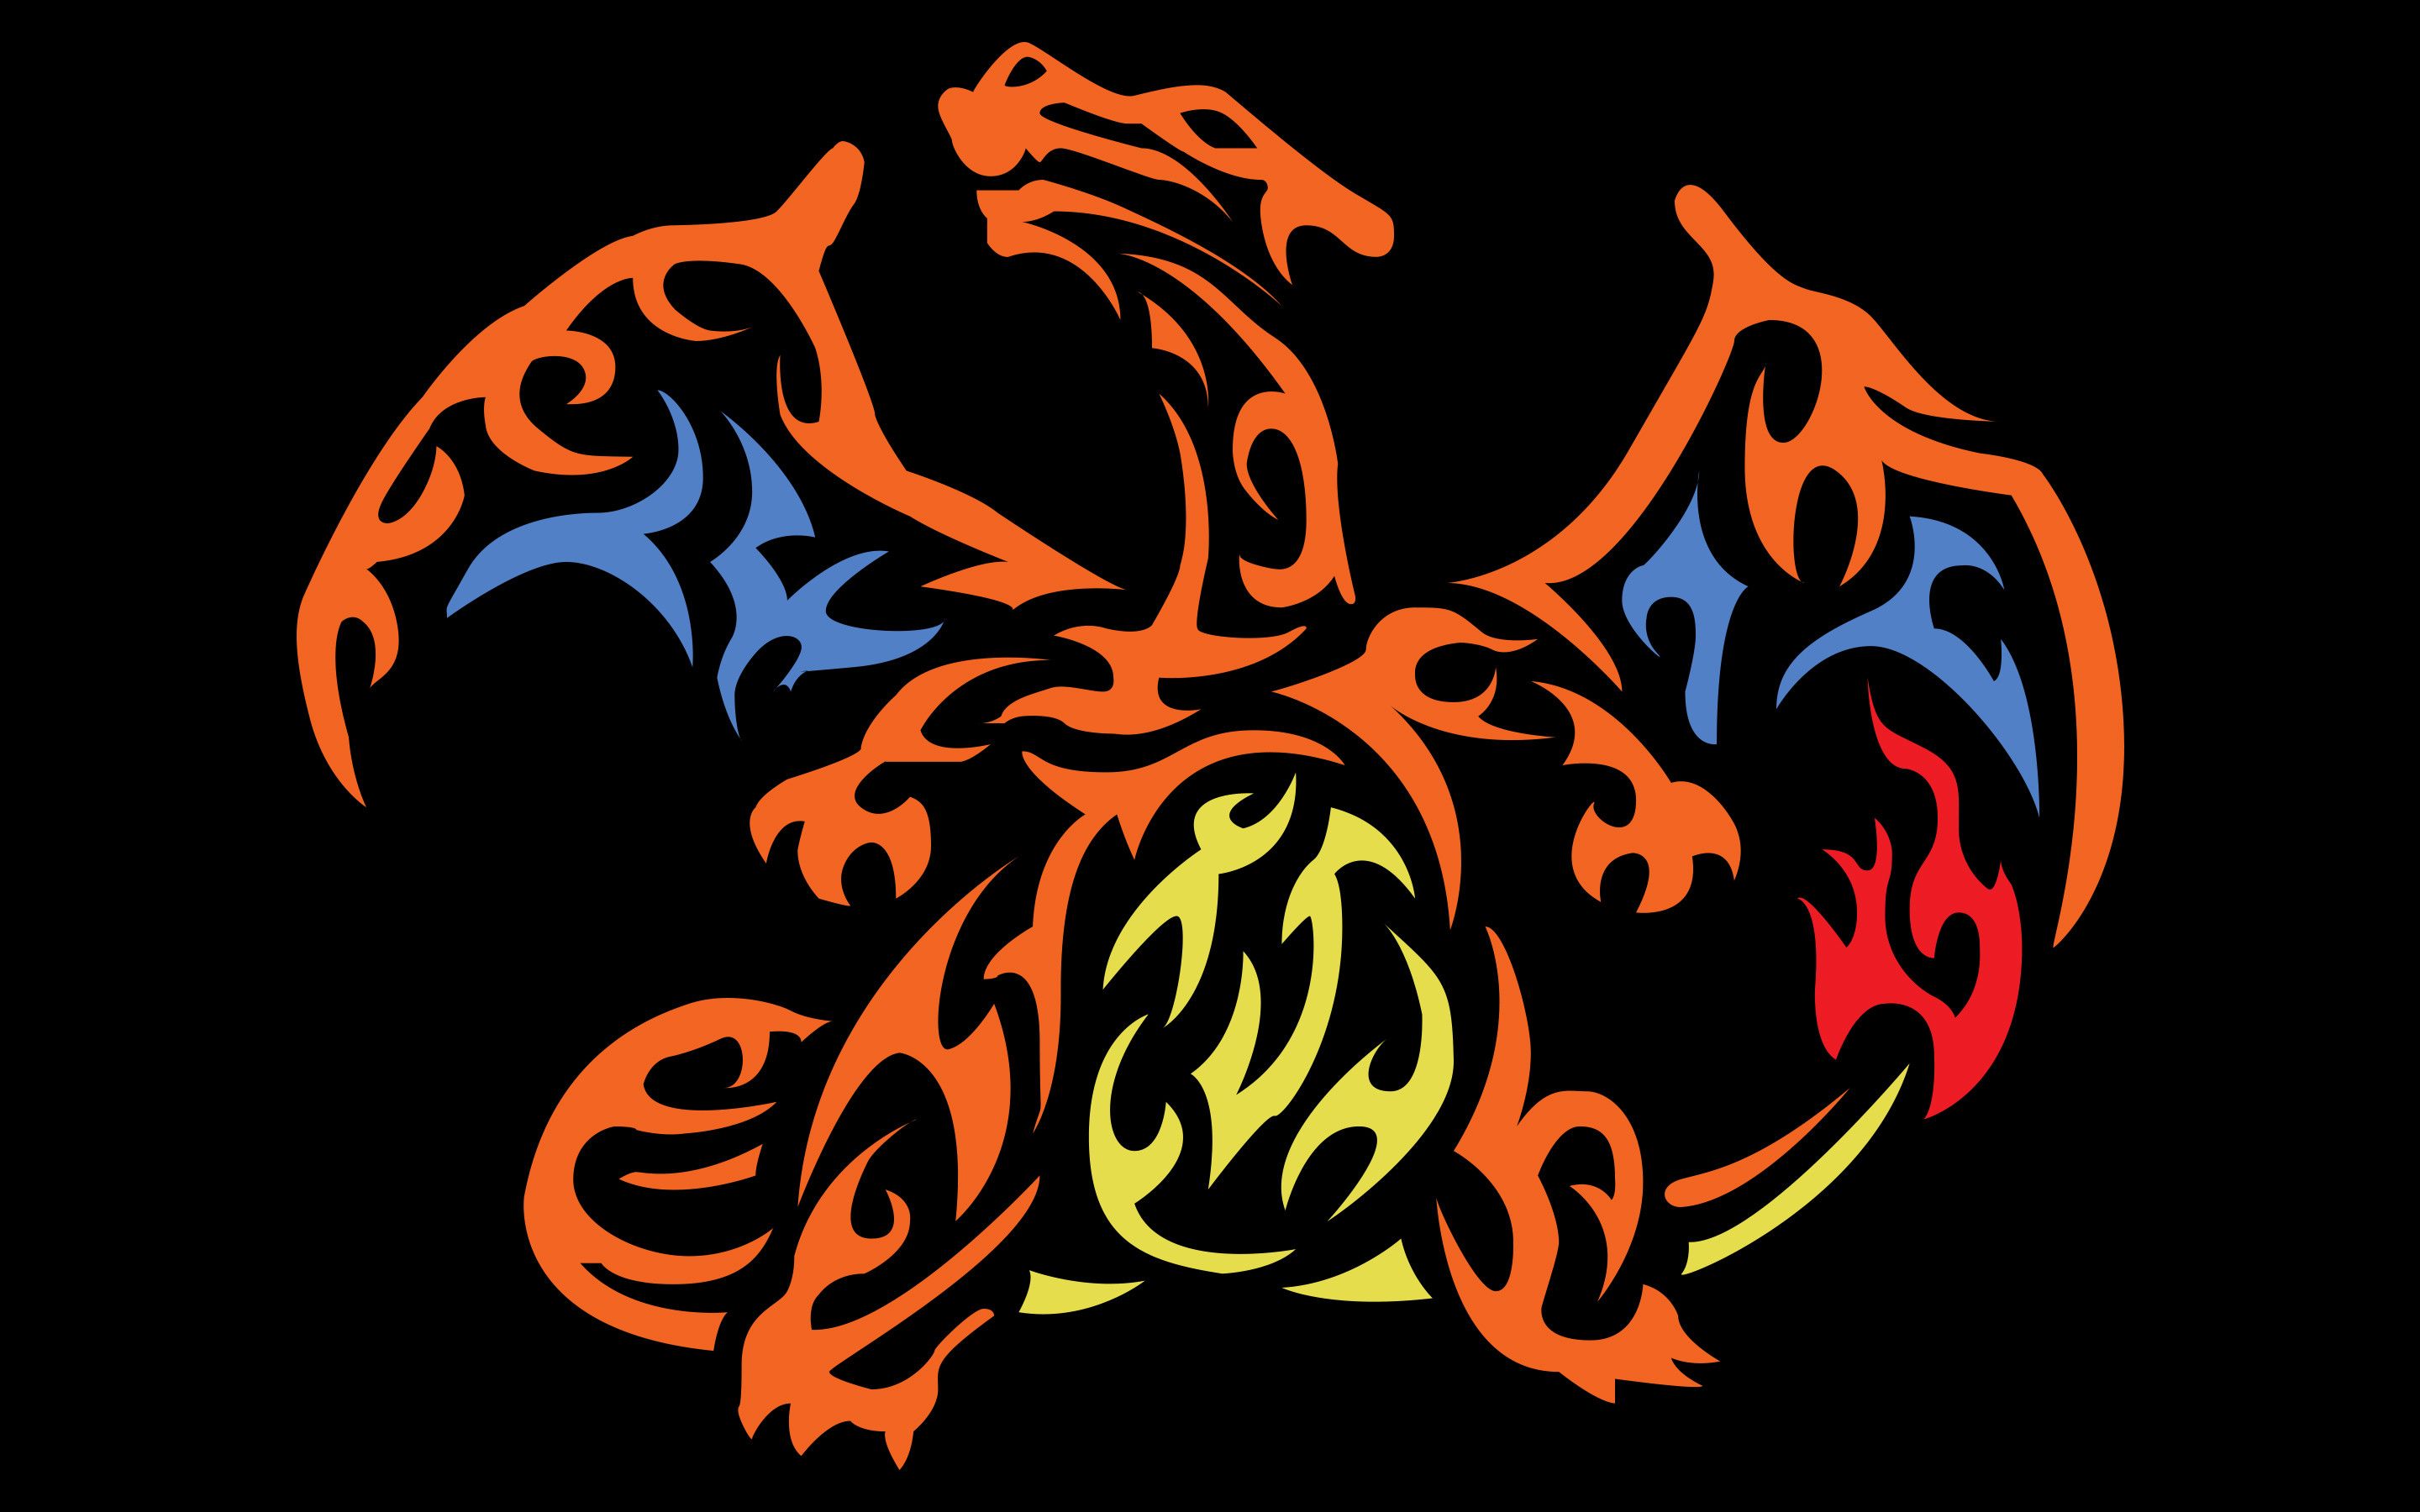 HD CHARIZARD WALLPAPER 4K NEW APK for Android Download